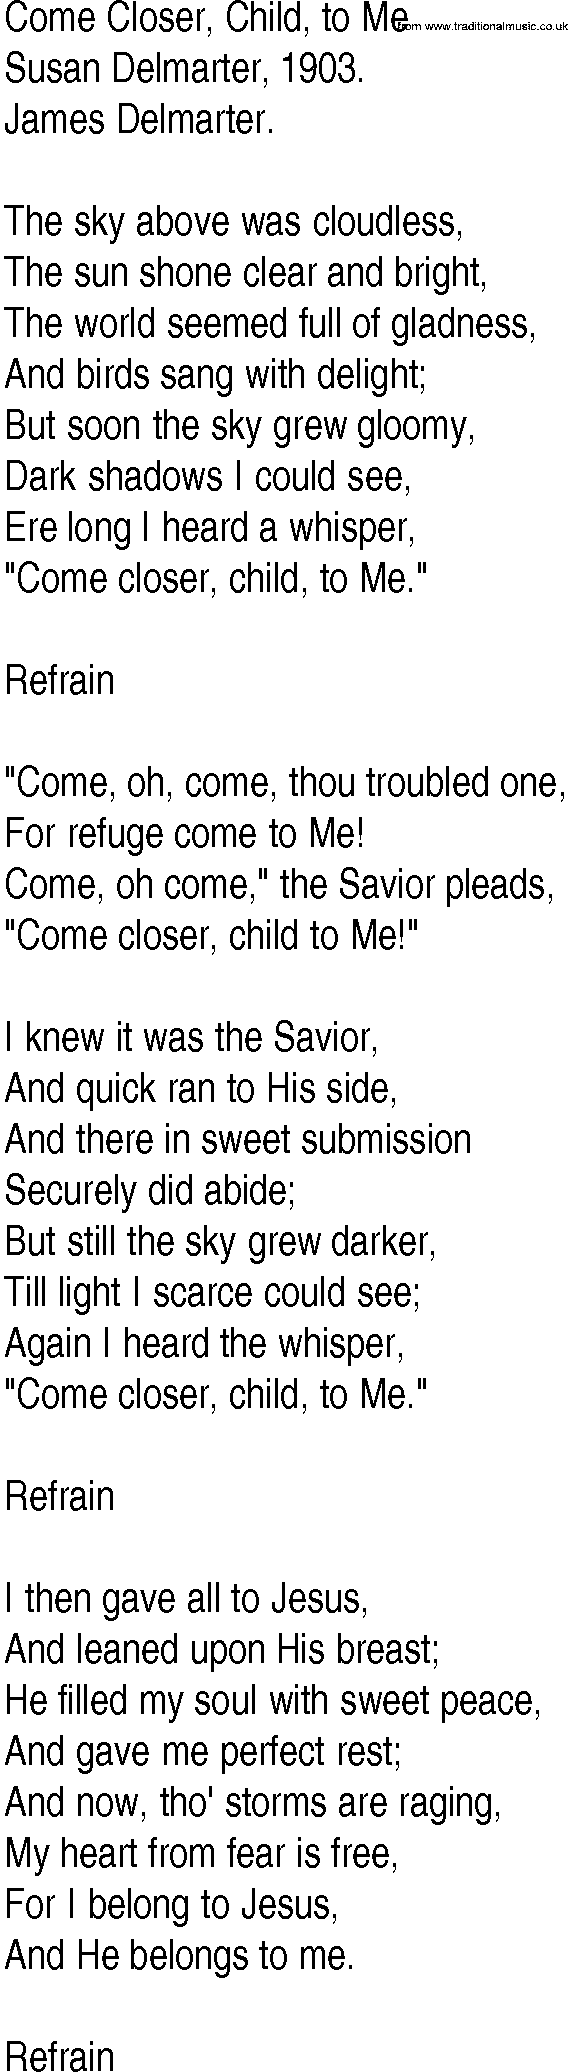 Hymn and Gospel Song: Come Closer, Child, to Me by Susan Delmarter lyrics